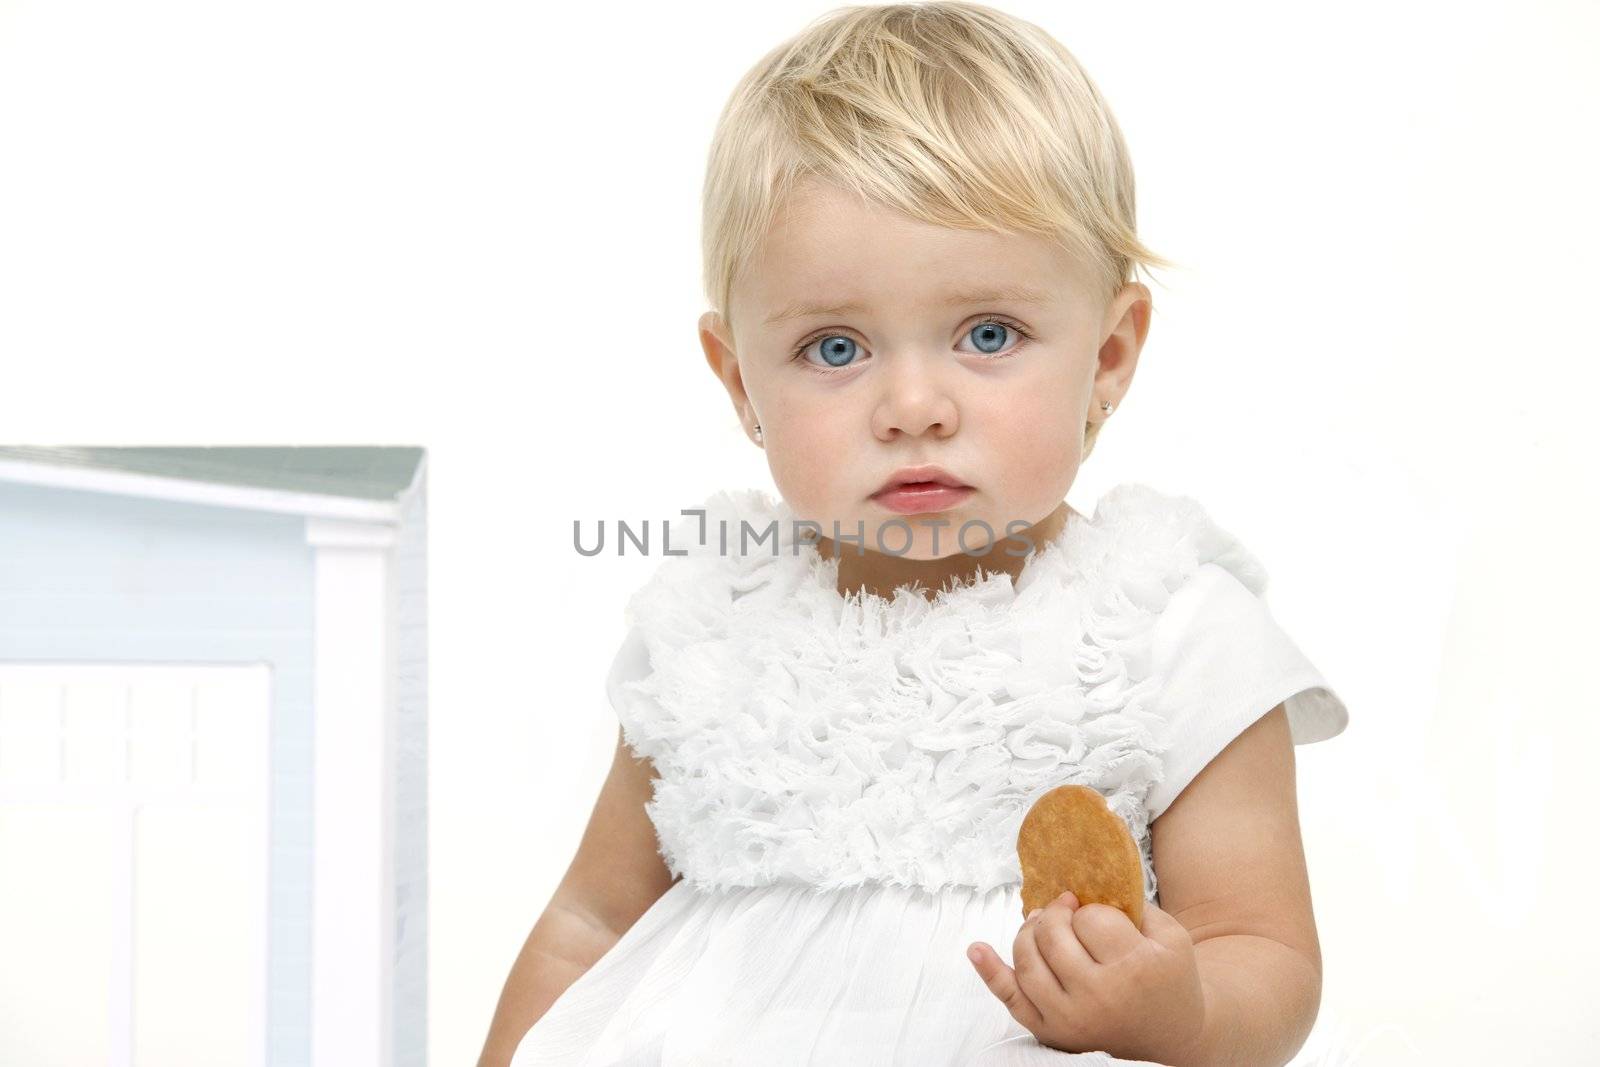 Blue eyed baby girl with boring expression holding a biscuit. Isolated on white background.